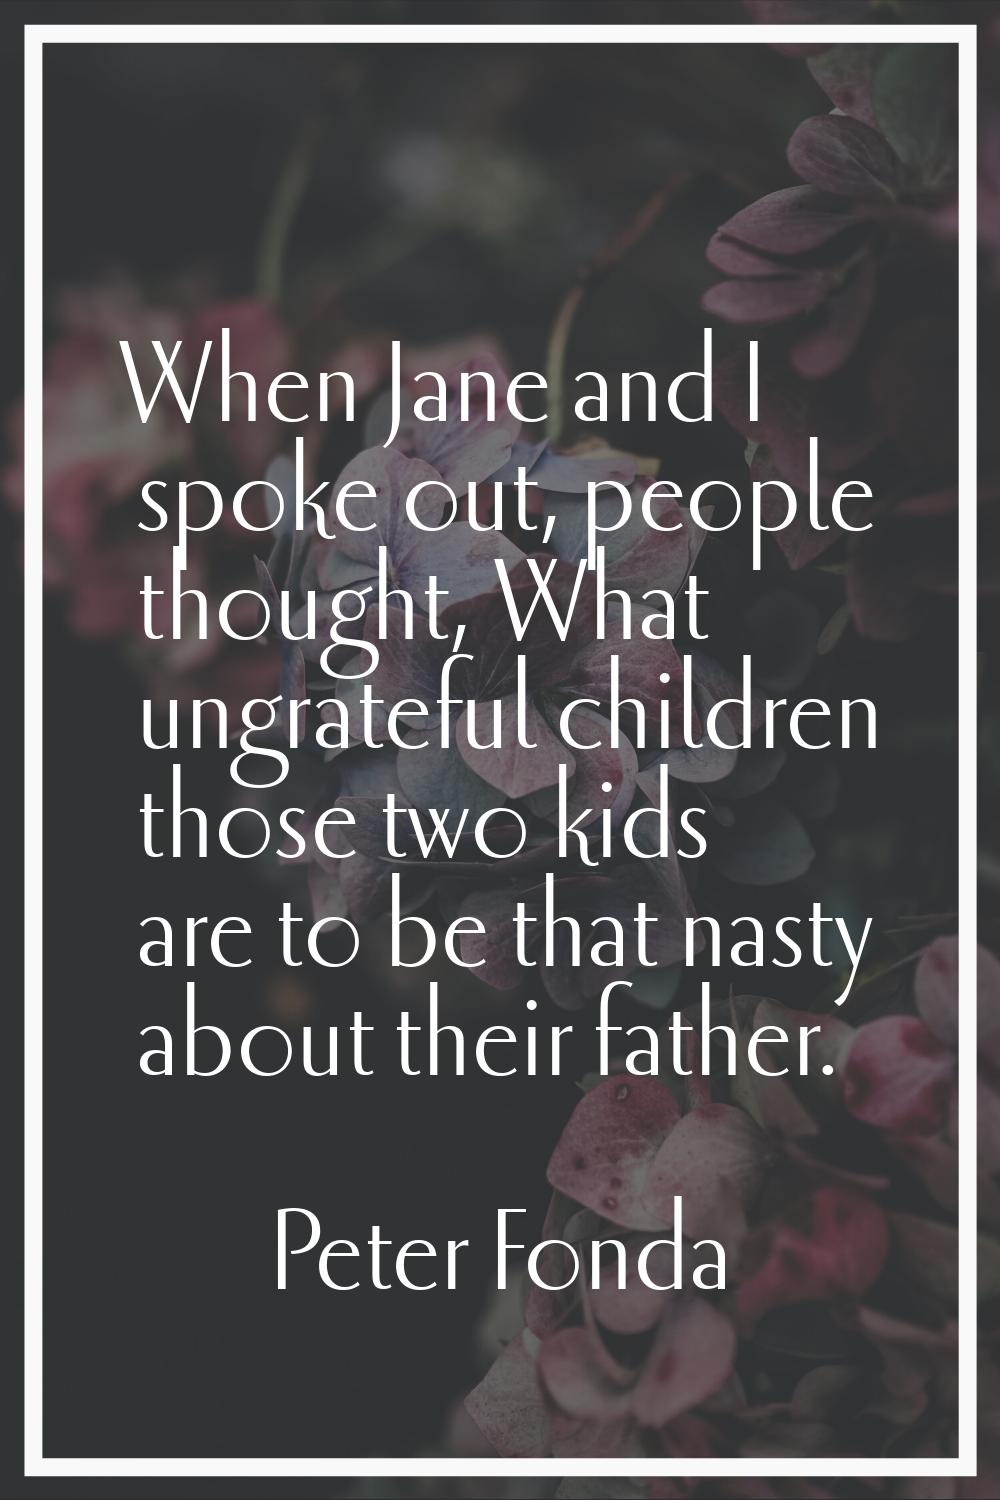 When Jane and I spoke out, people thought, What ungrateful children those two kids are to be that n